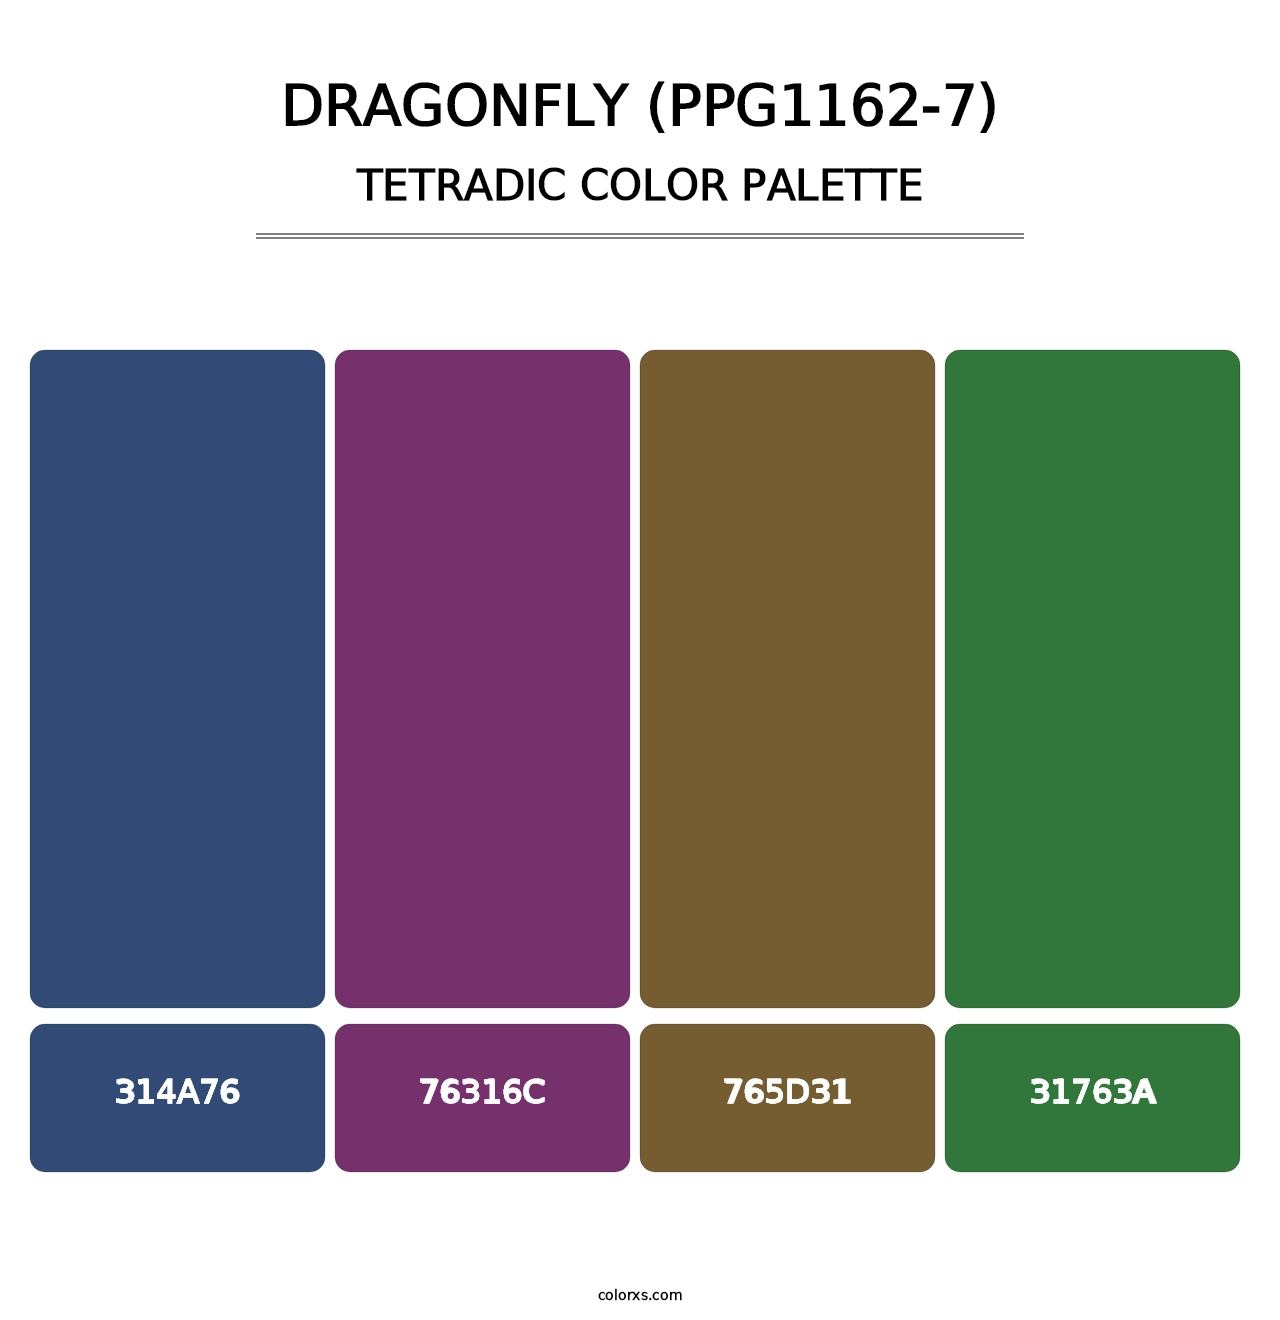 Dragonfly (PPG1162-7) - Tetradic Color Palette